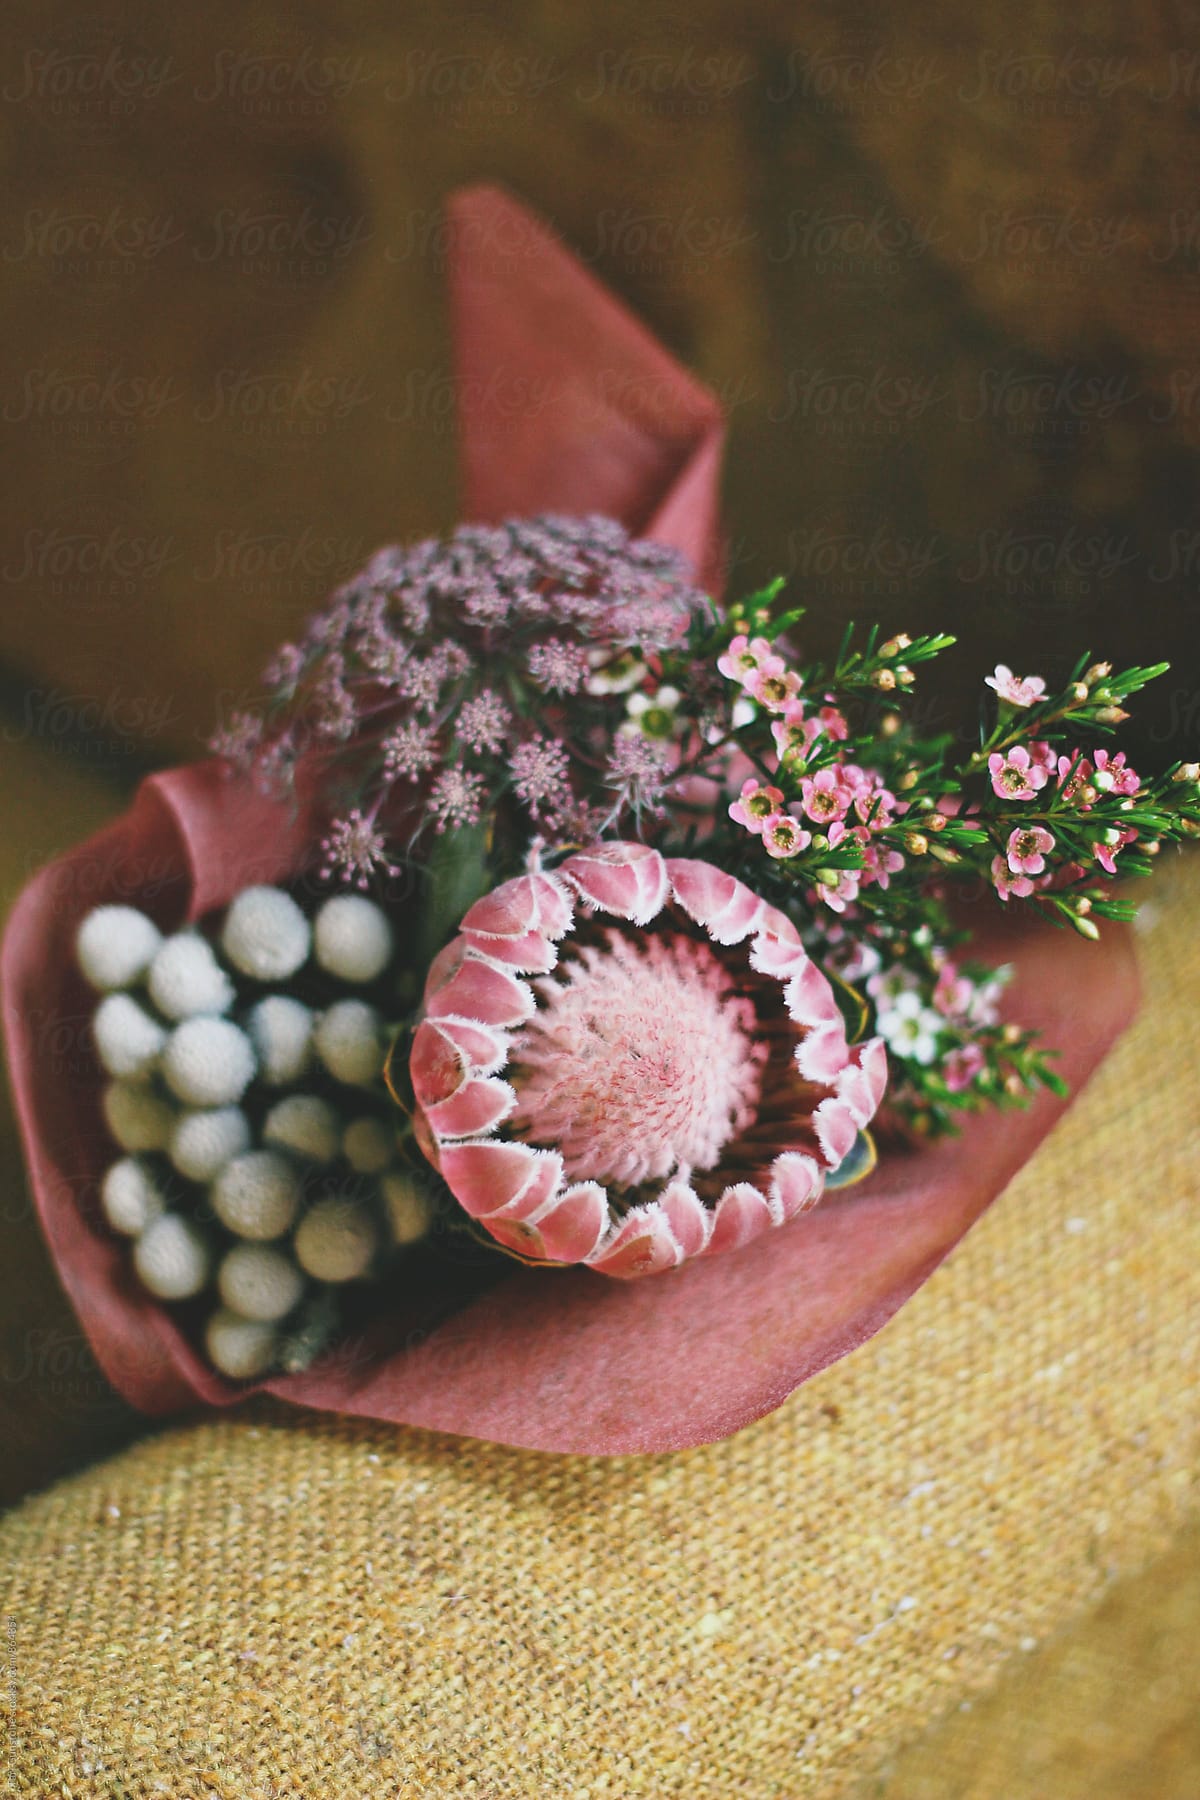 Bouquet of flowers resting on tweed armchair